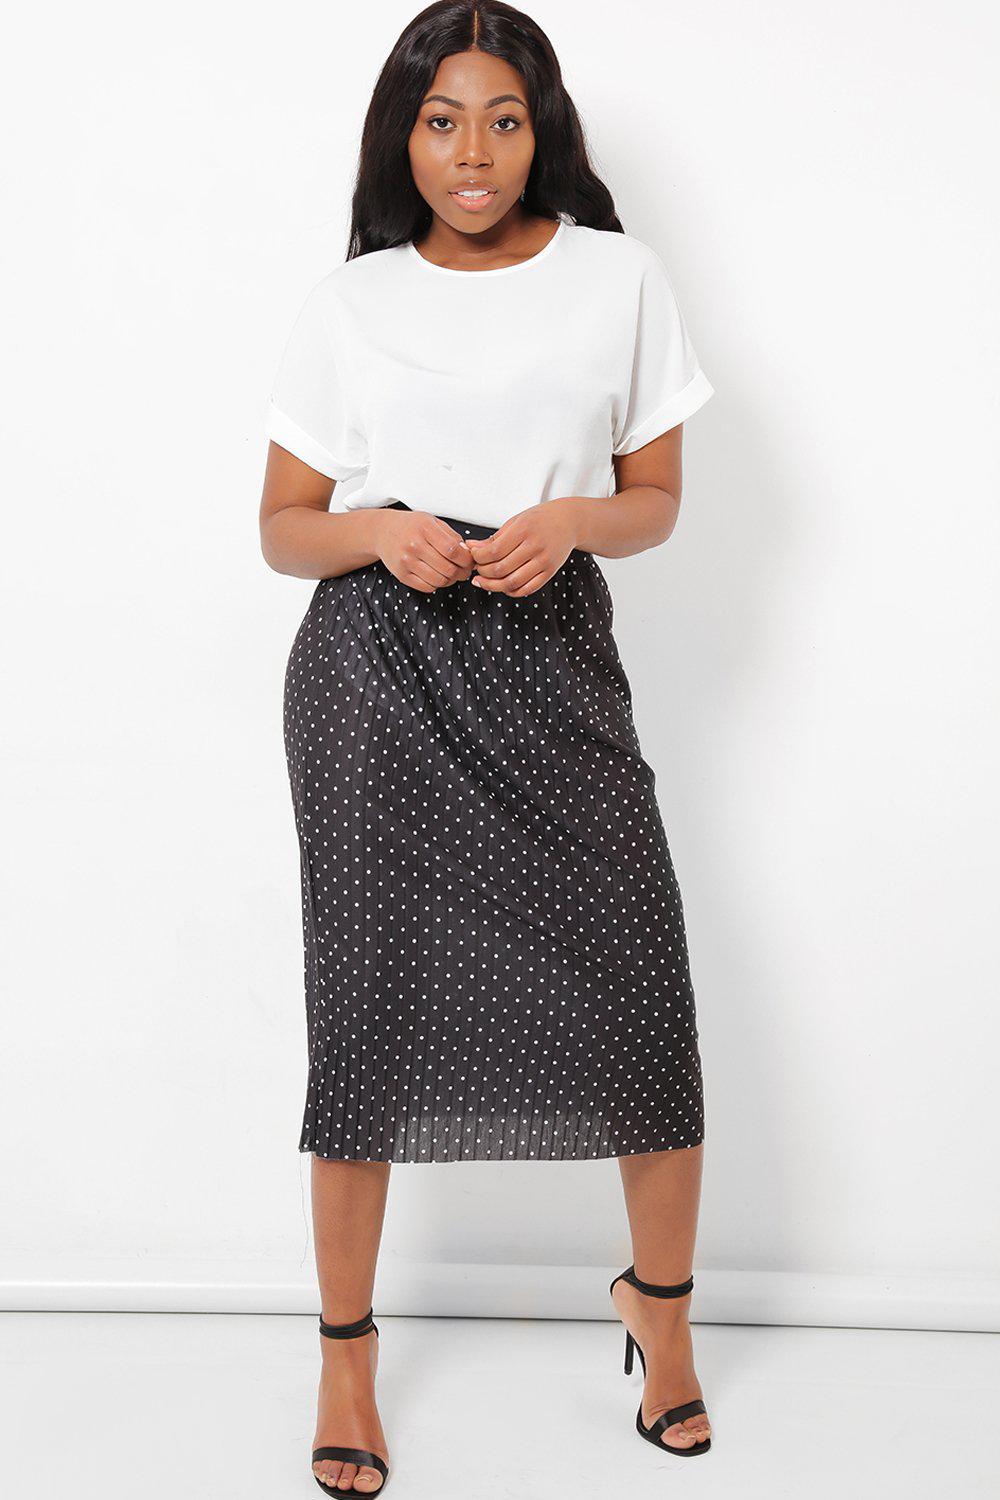 Get Pleated Black Polka Dot Skirt for only £5.00 exclusively at ...